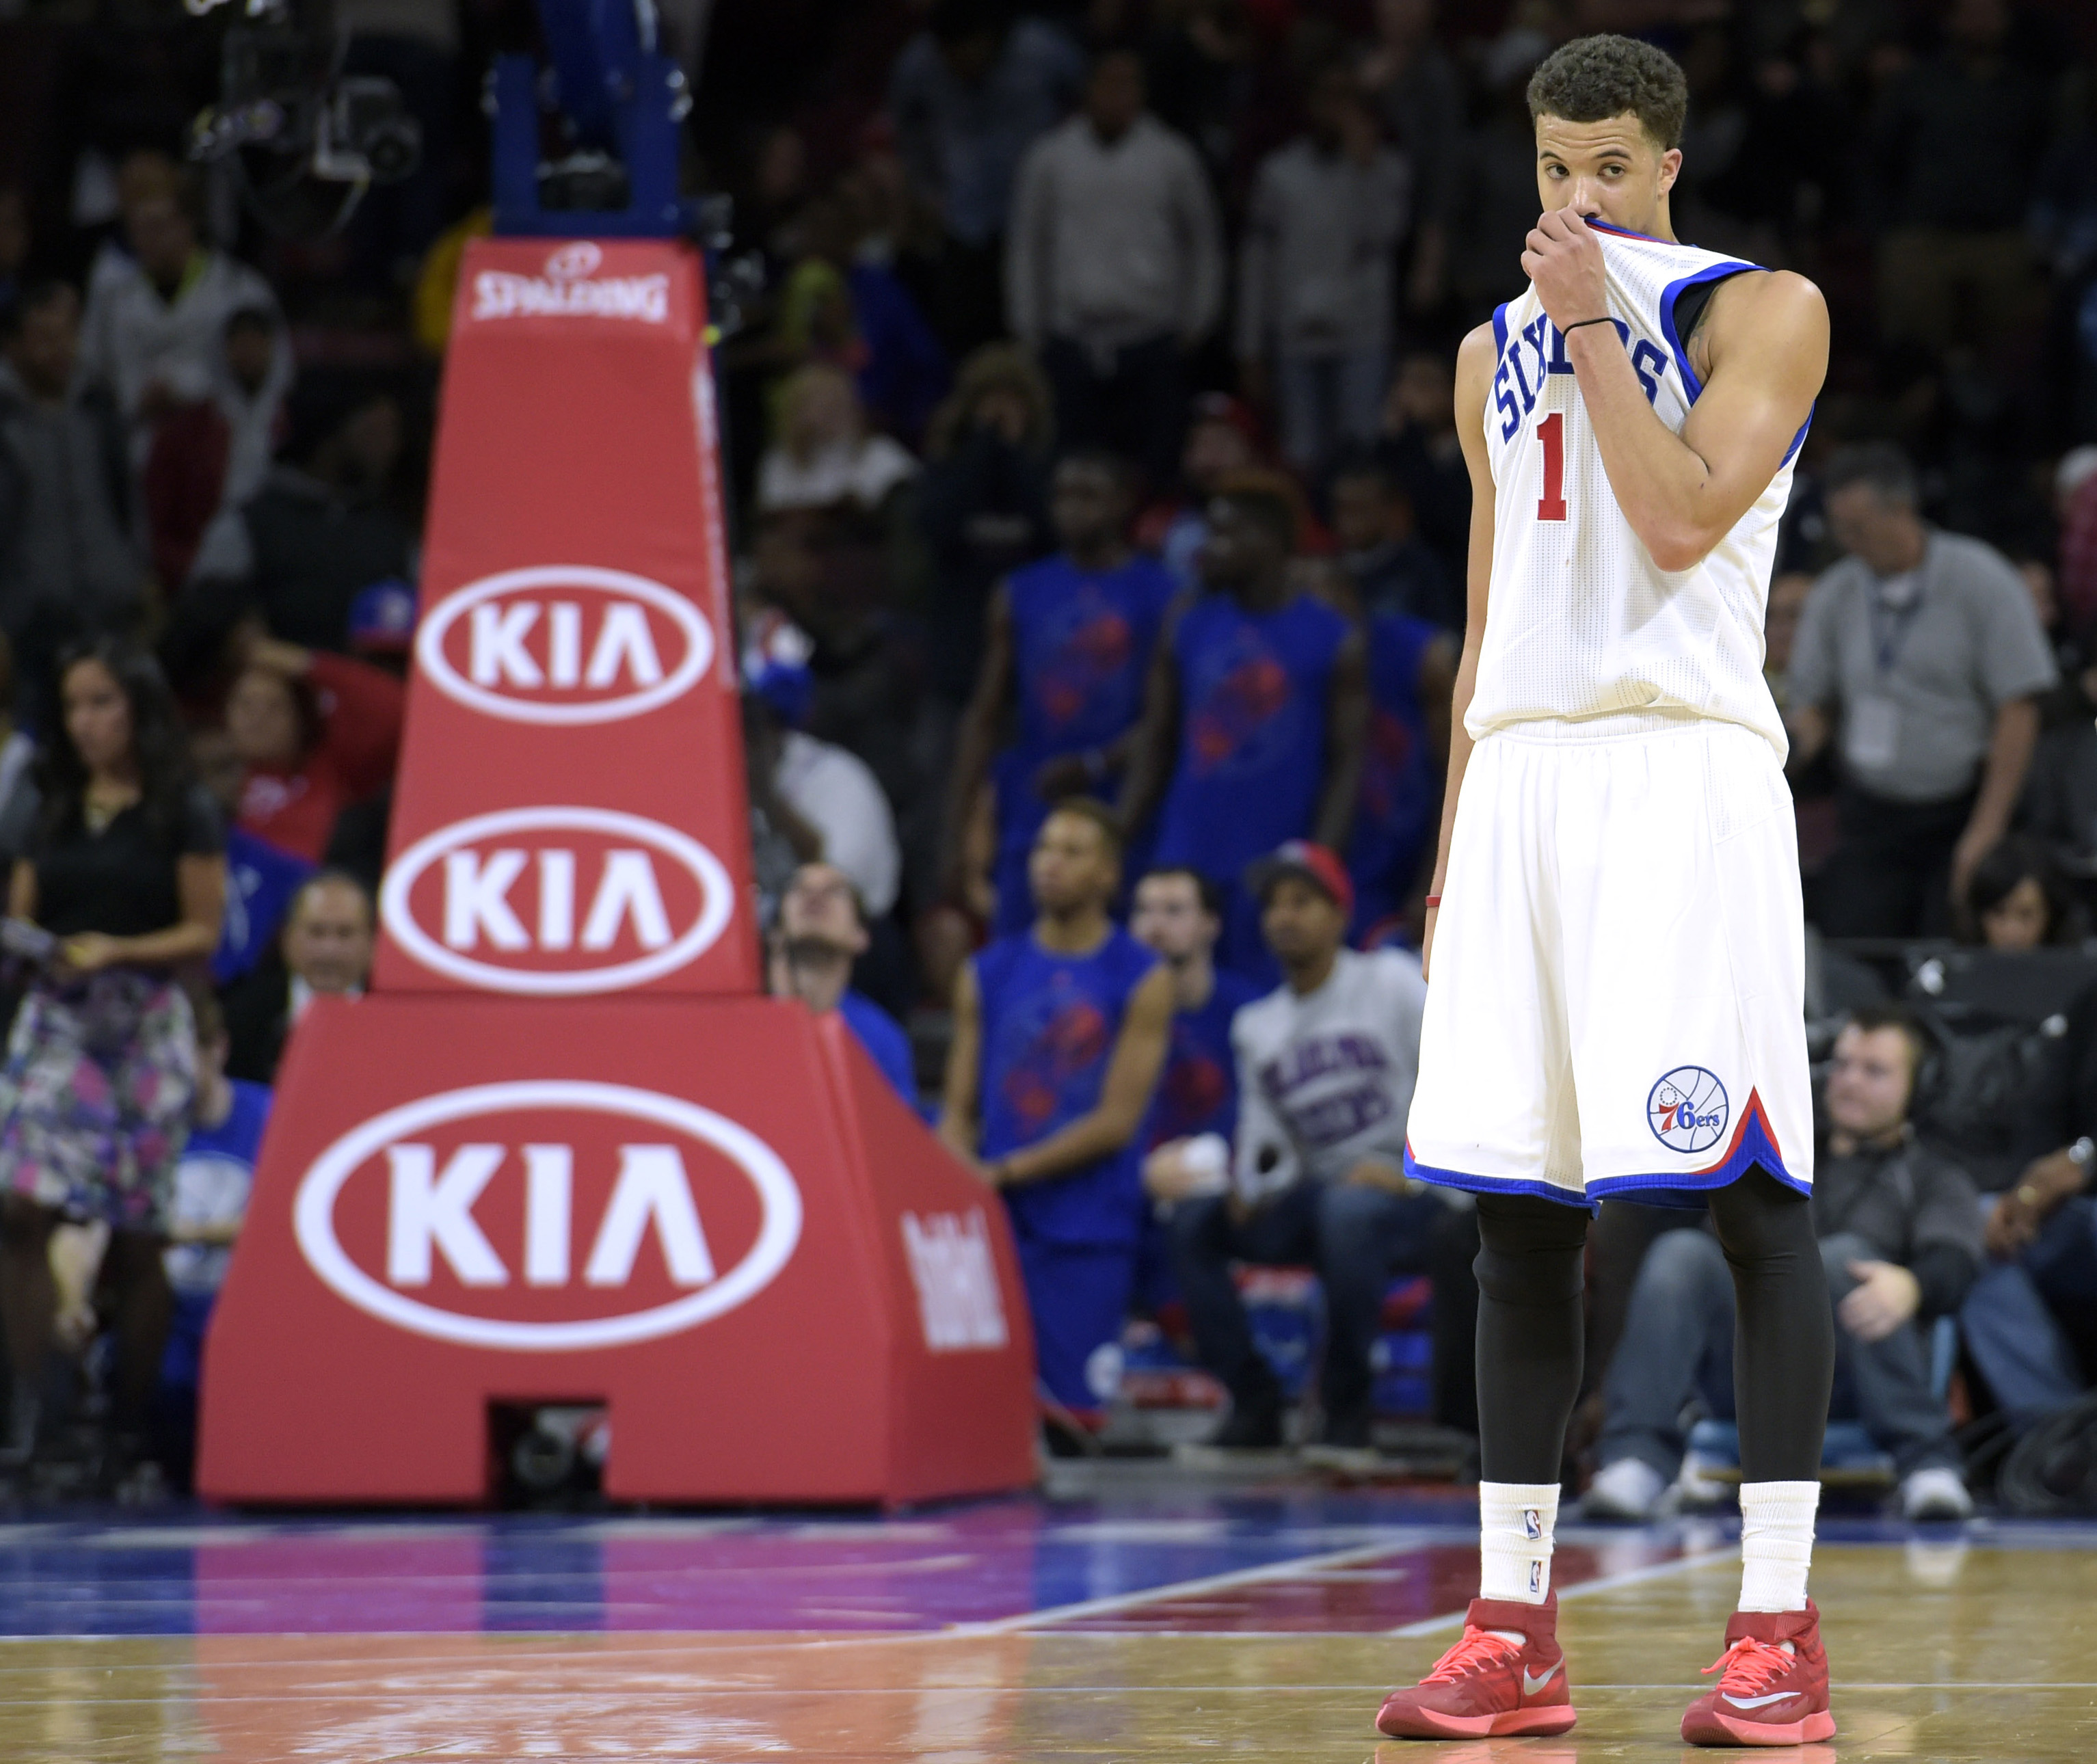 Sixers guard Michael Carter-Williams. (Eric Hartline, USA TODAY Sports)